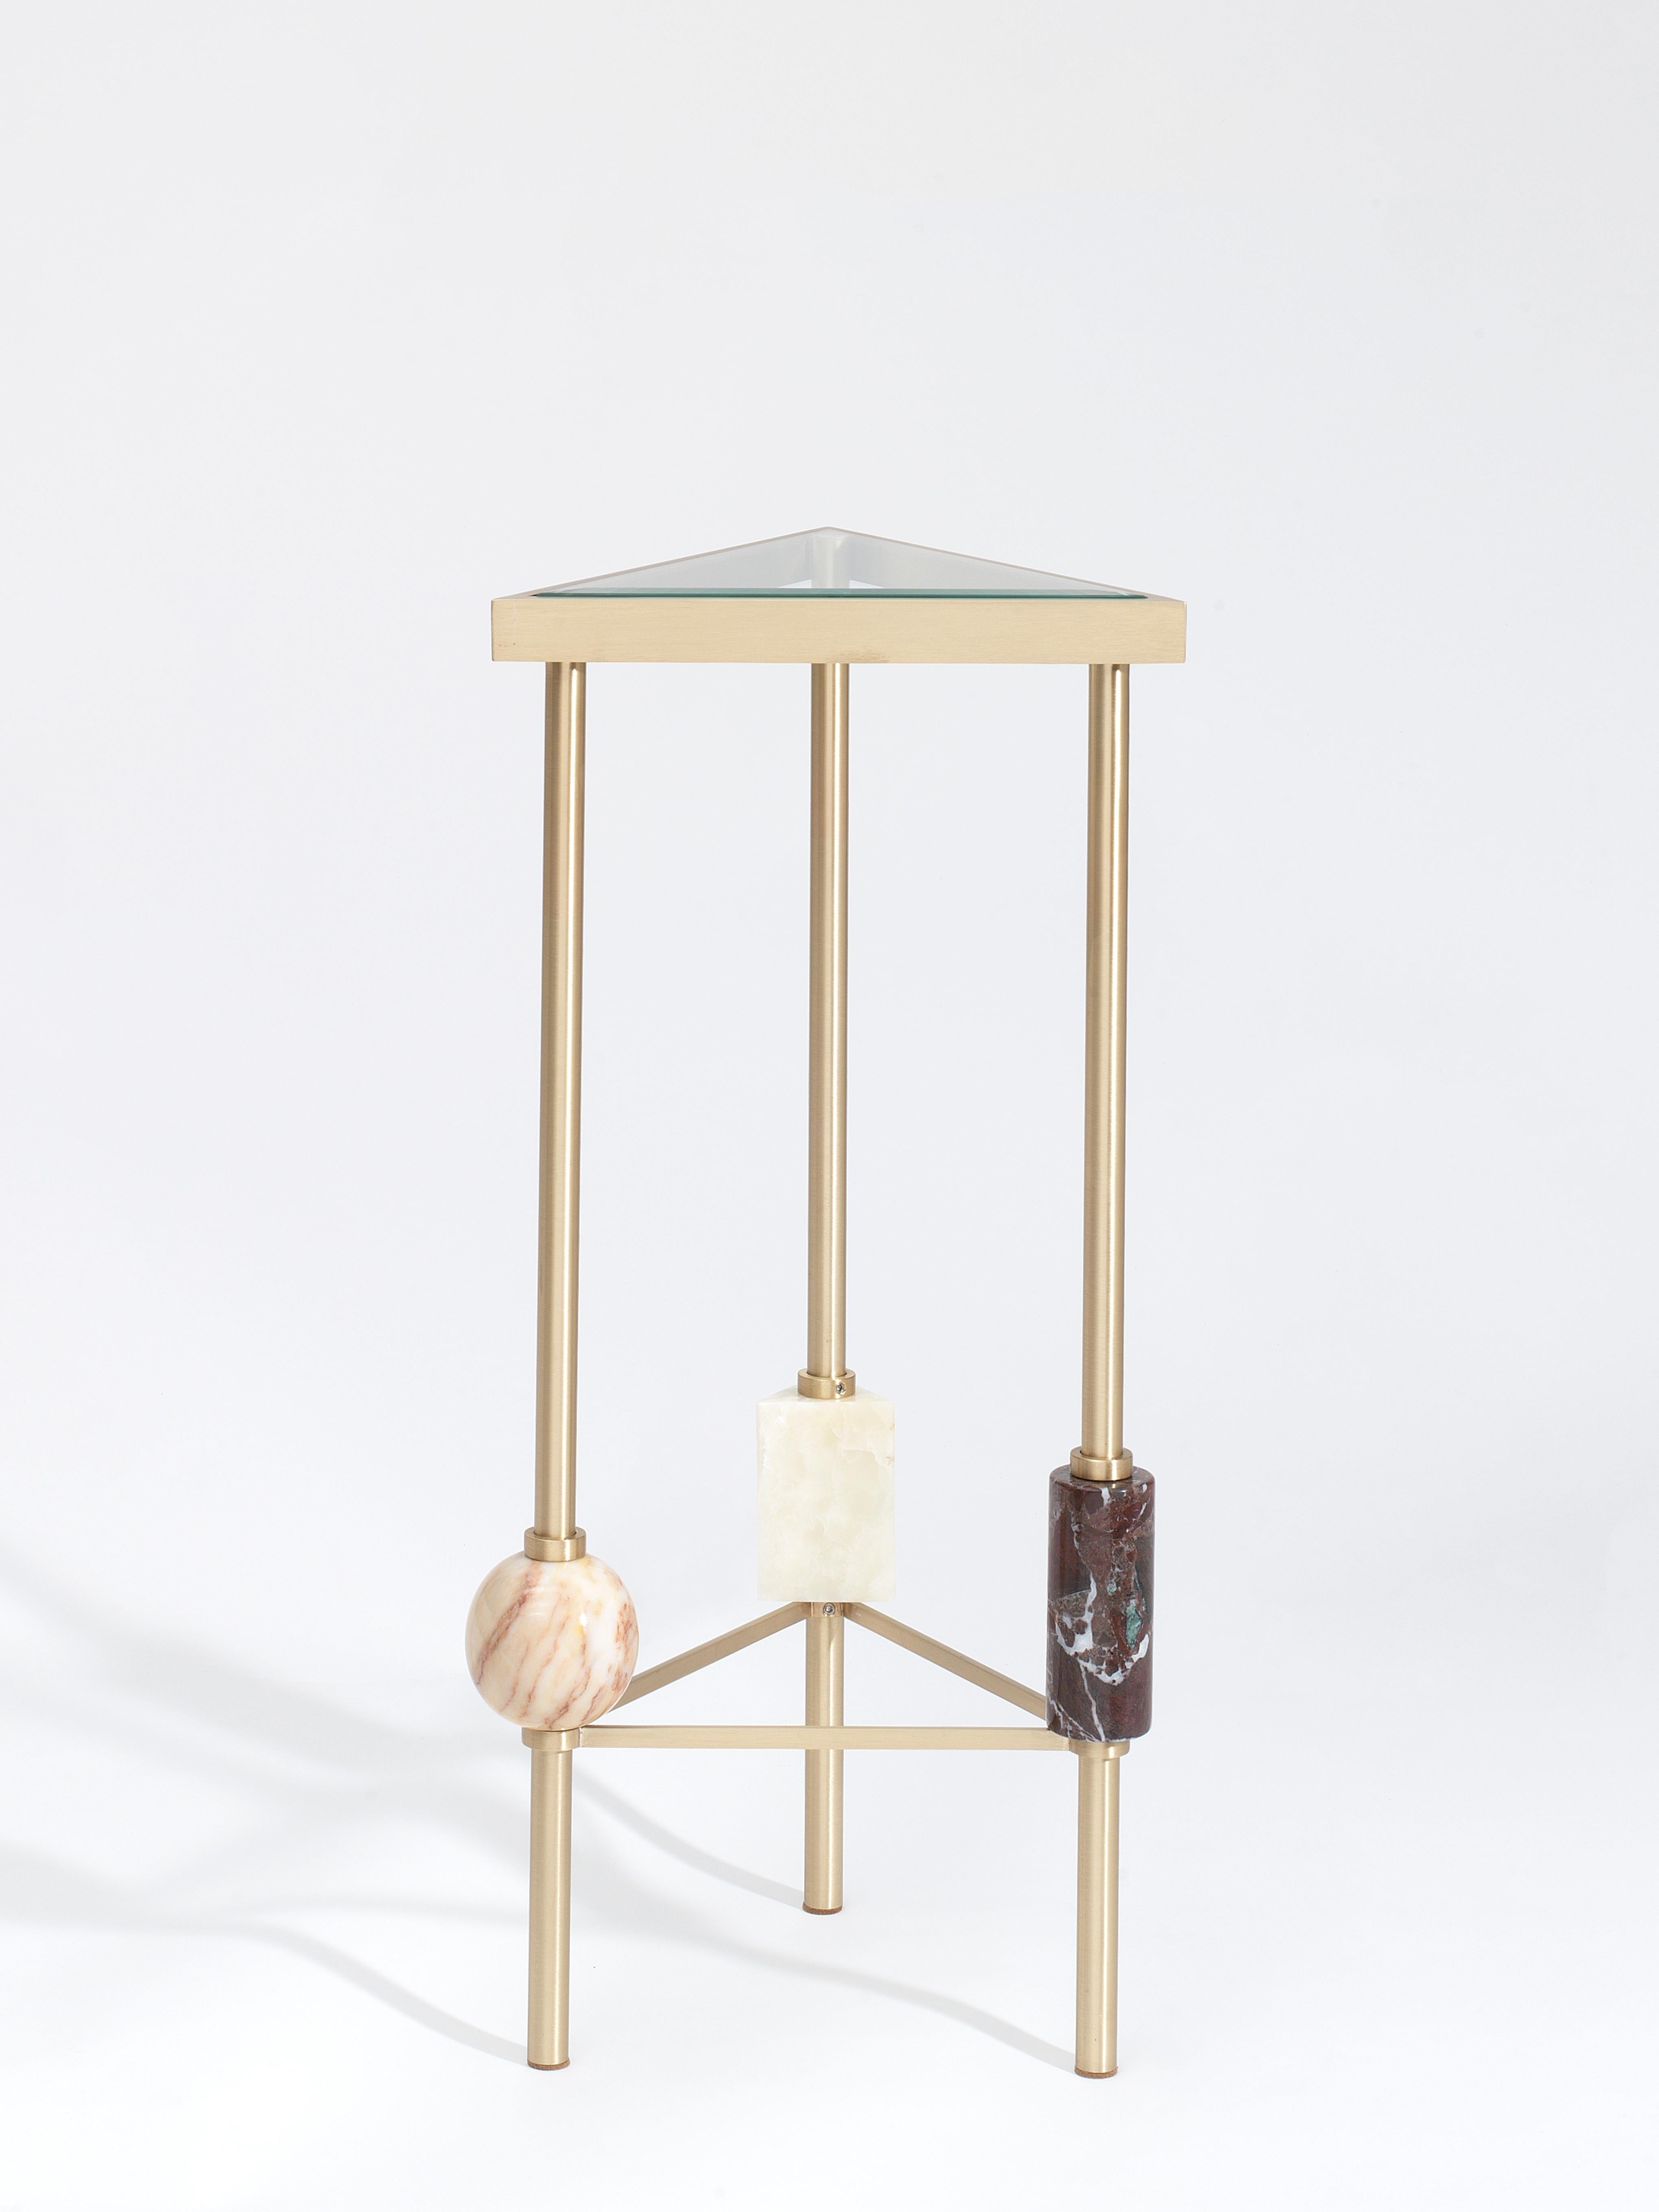 Plato cocktail table, multicolor, by Yasemin Toygar
Handmade
Dimensions: W 33 x D 33 x H 70 cm
Materials: Brass, marble, onyx, glass.

Plato Collection

Inspired by the geometric still life, Plato explores and defies the boundaries of sensory